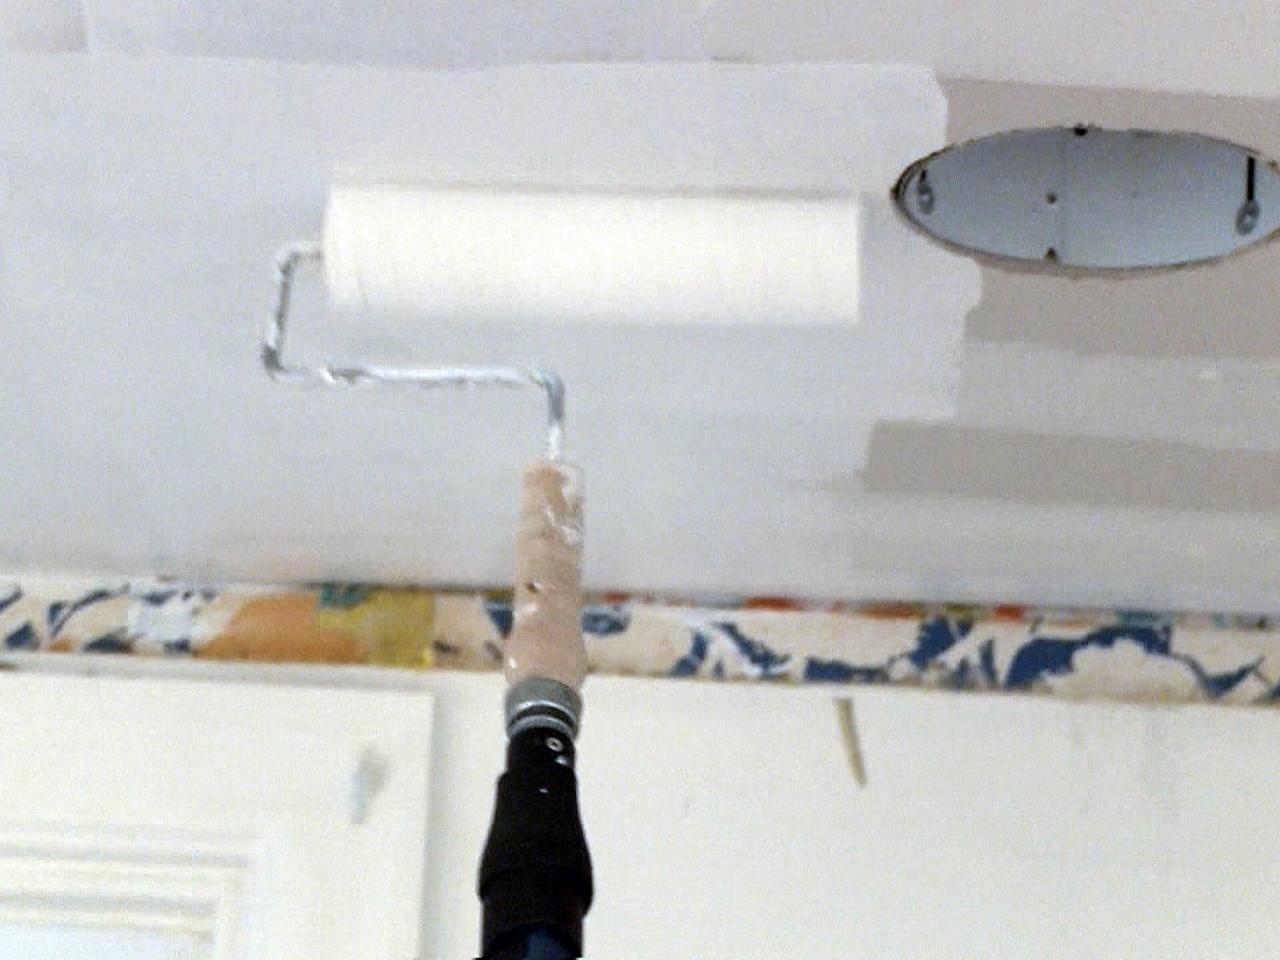 How To Install A Tin Tile Ceiling, Can You Put Tin Ceiling Tiles Over Popcorn